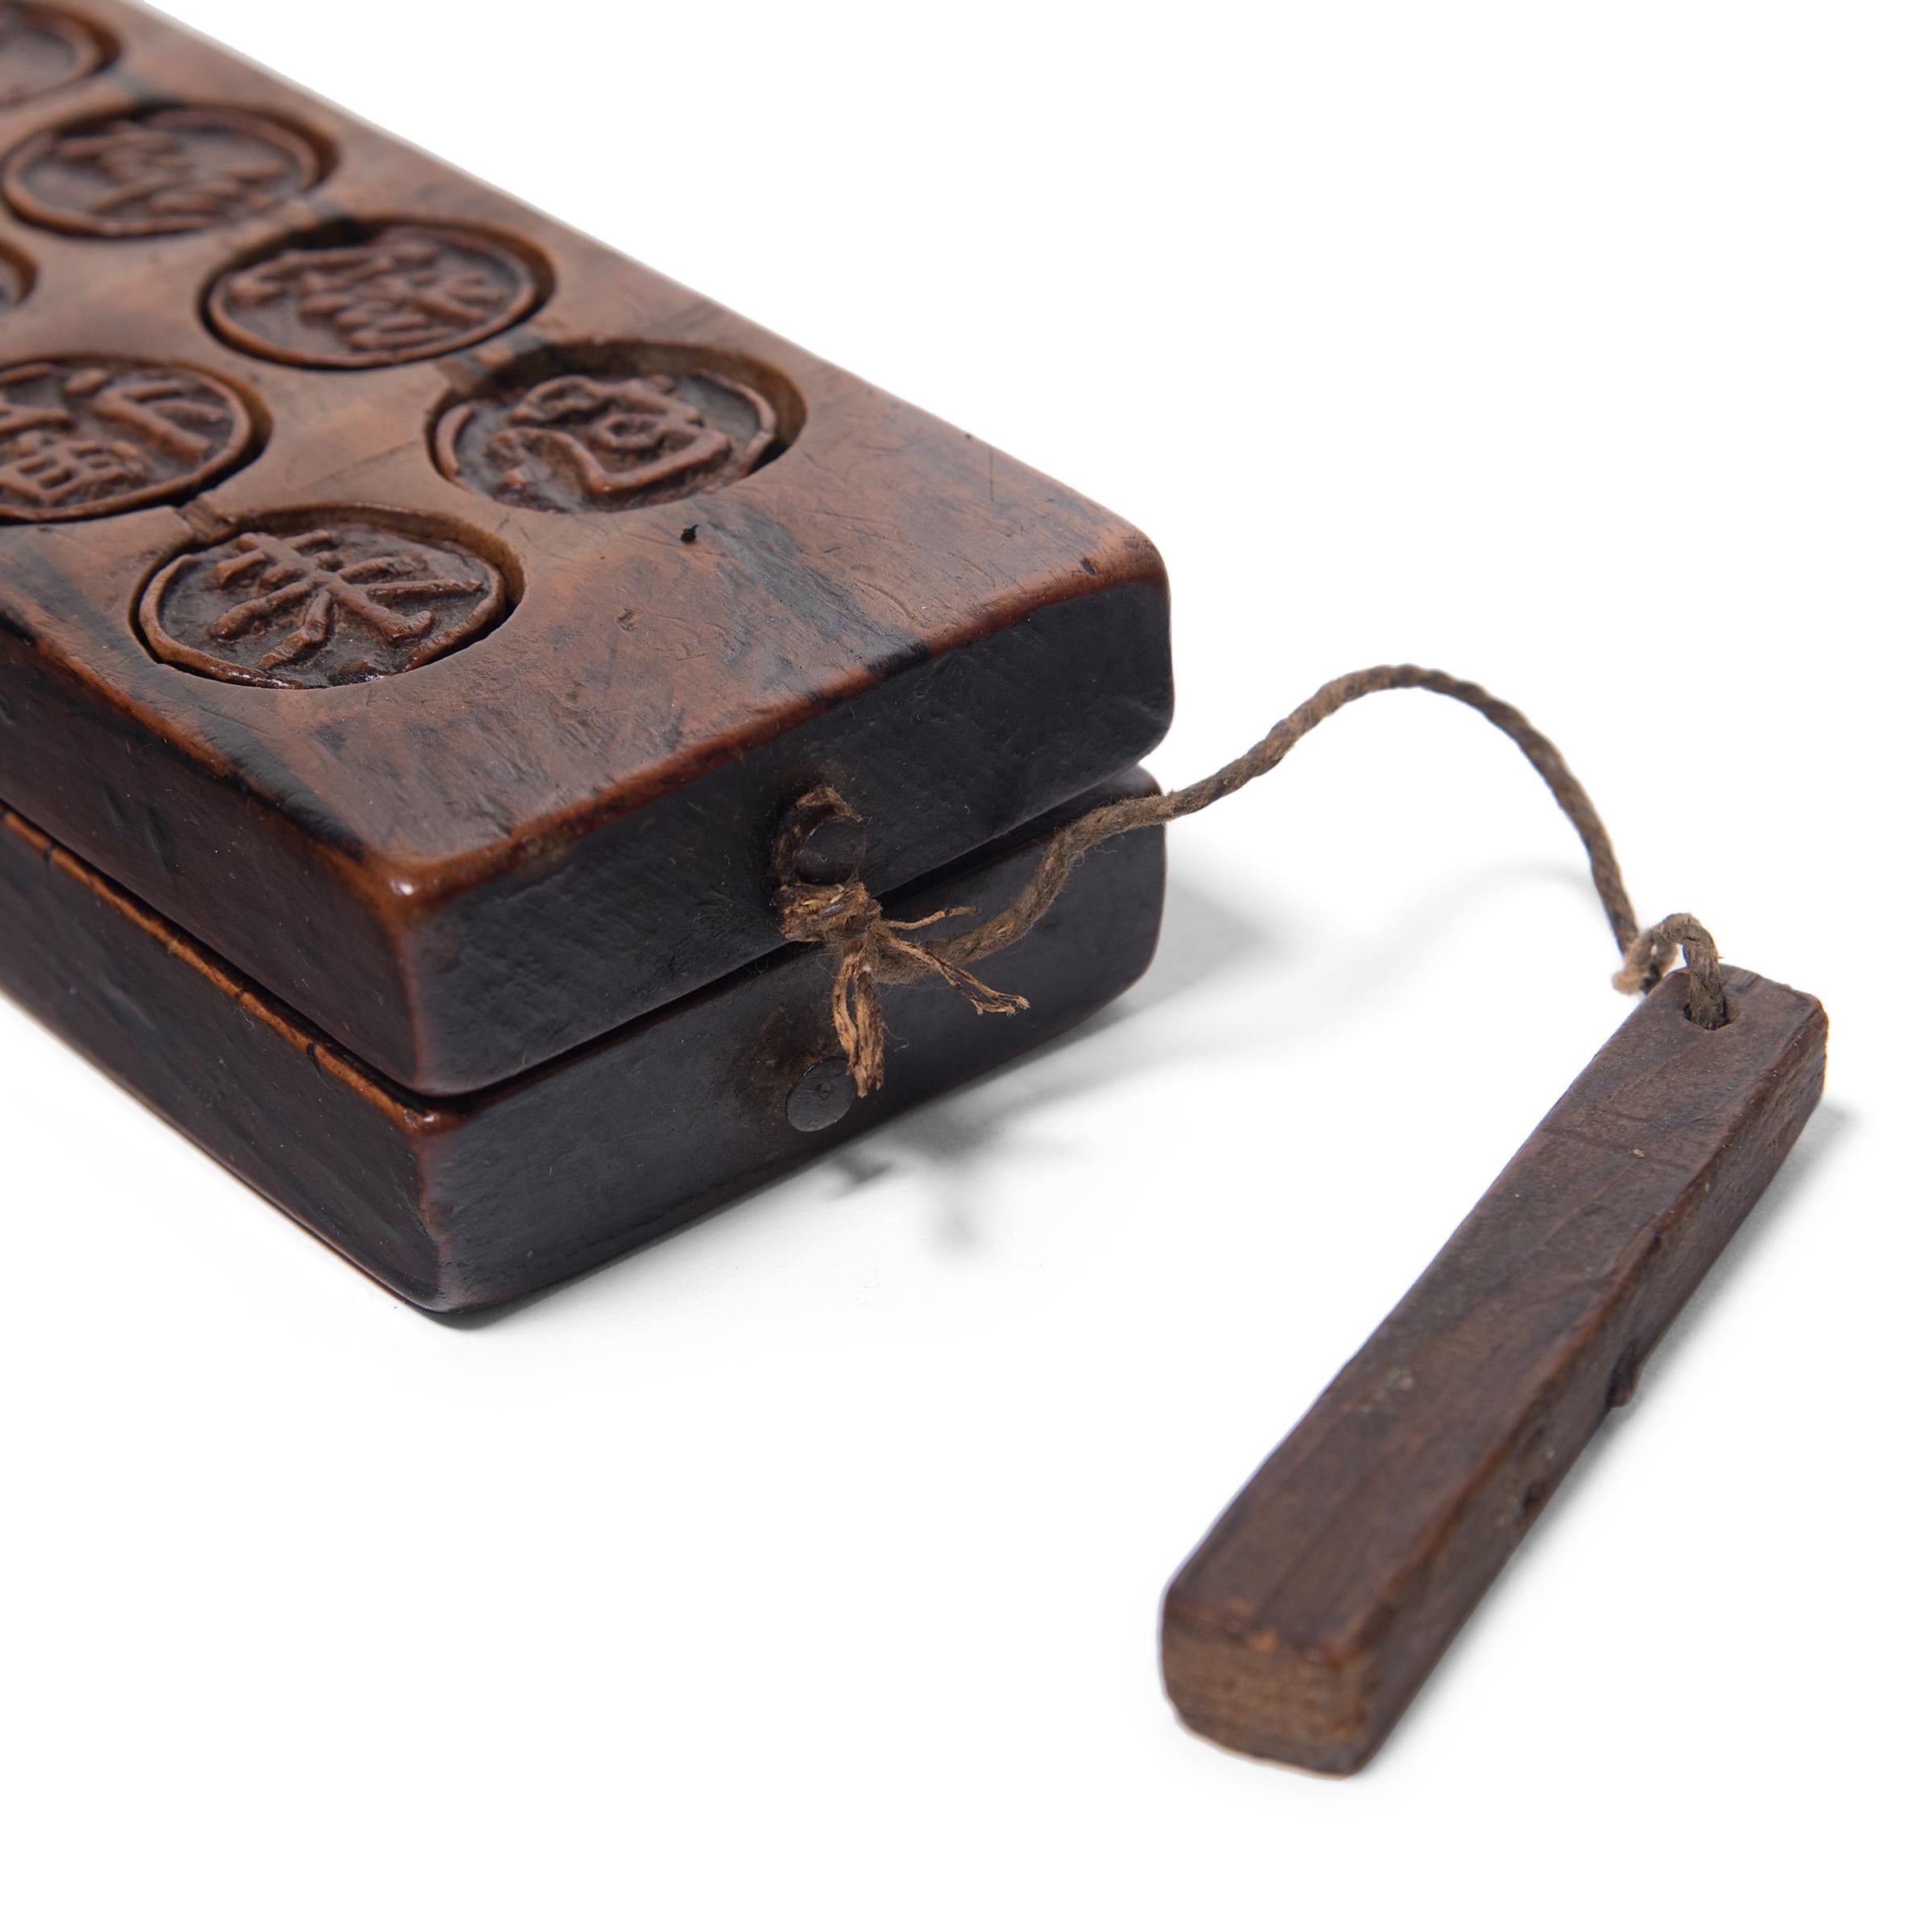 Dated to the mid-19th century, this rustic wood press is carved with twenty round molds used for shaping festive mooncakes. Packed with lotus root, red bean, or other regional fillings, mooncakes are a delicacy eaten during the Mid-Autumn Festival